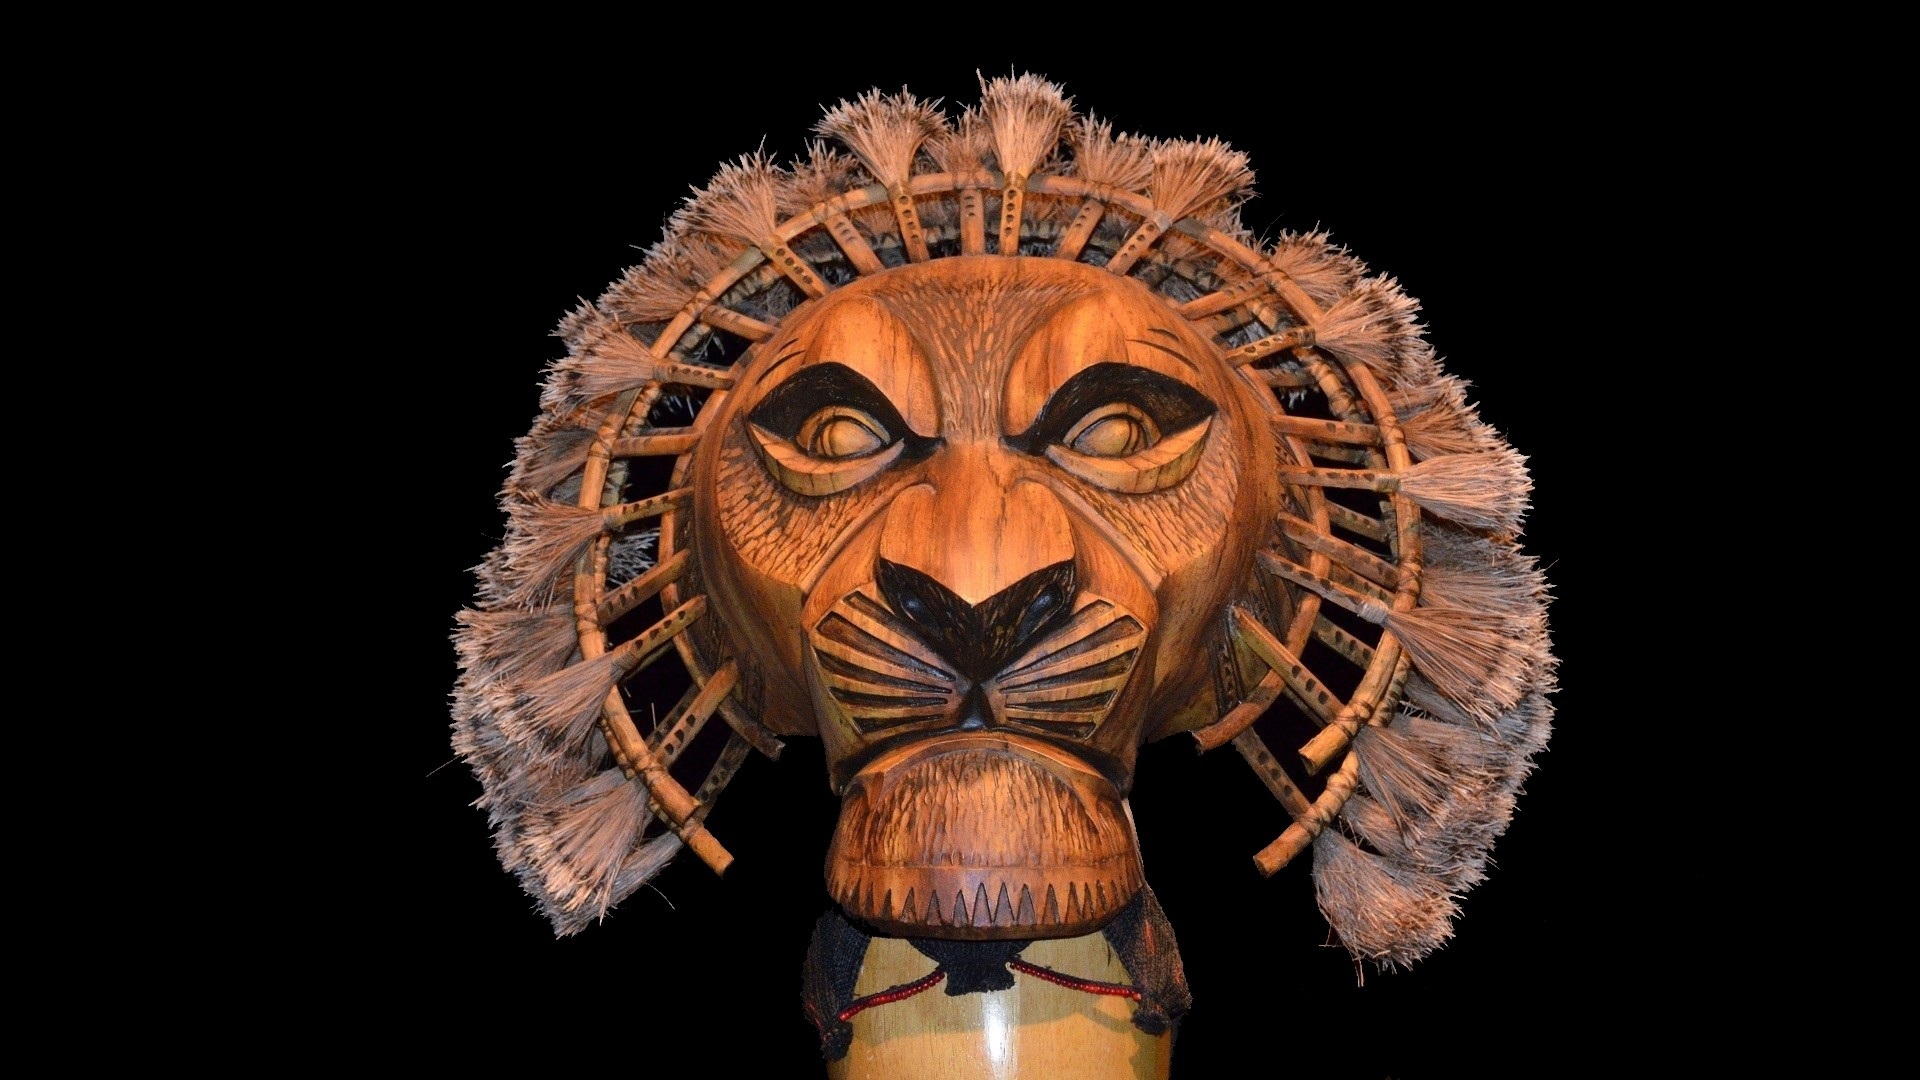 Mask Mufasa The Lion King The Lion King 1920x1080